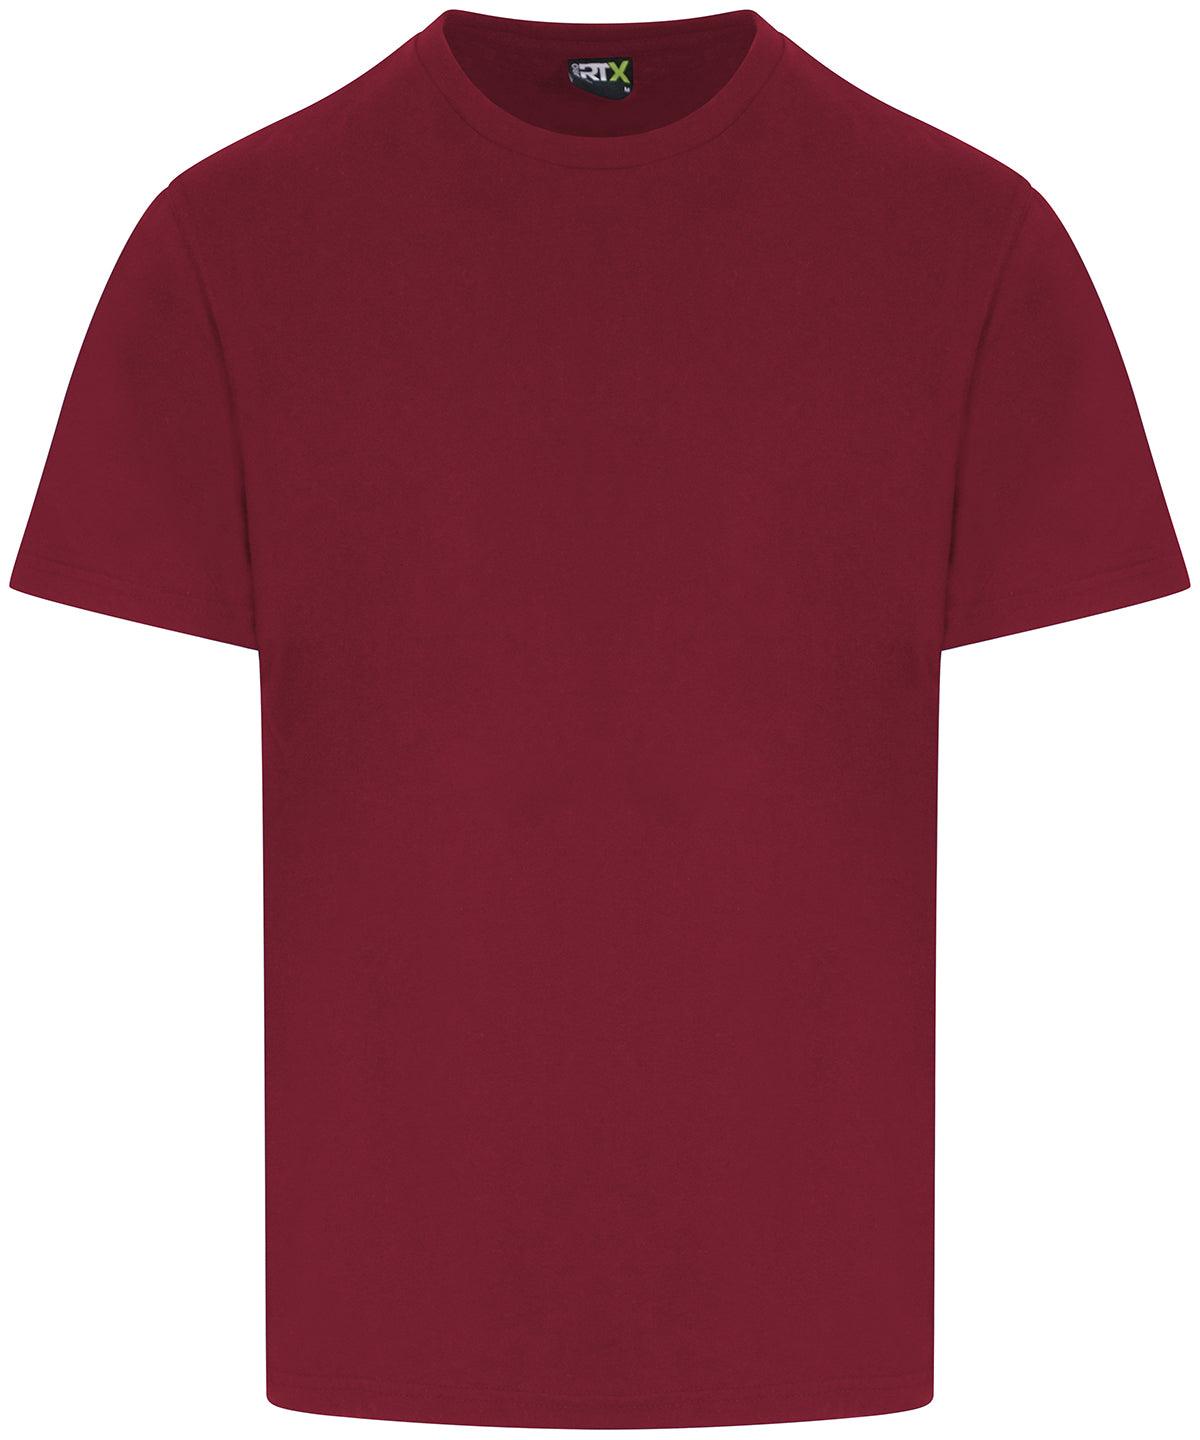 Burgundy - Pro t-shirt T-Shirts ProRTX 2022 Spring Edit, Back to Business, Must Haves, New Colours for 2021, New Colours for 2023, New Sizes for 2021, Plus Sizes, T-Shirts & Vests, Workwear Schoolwear Centres